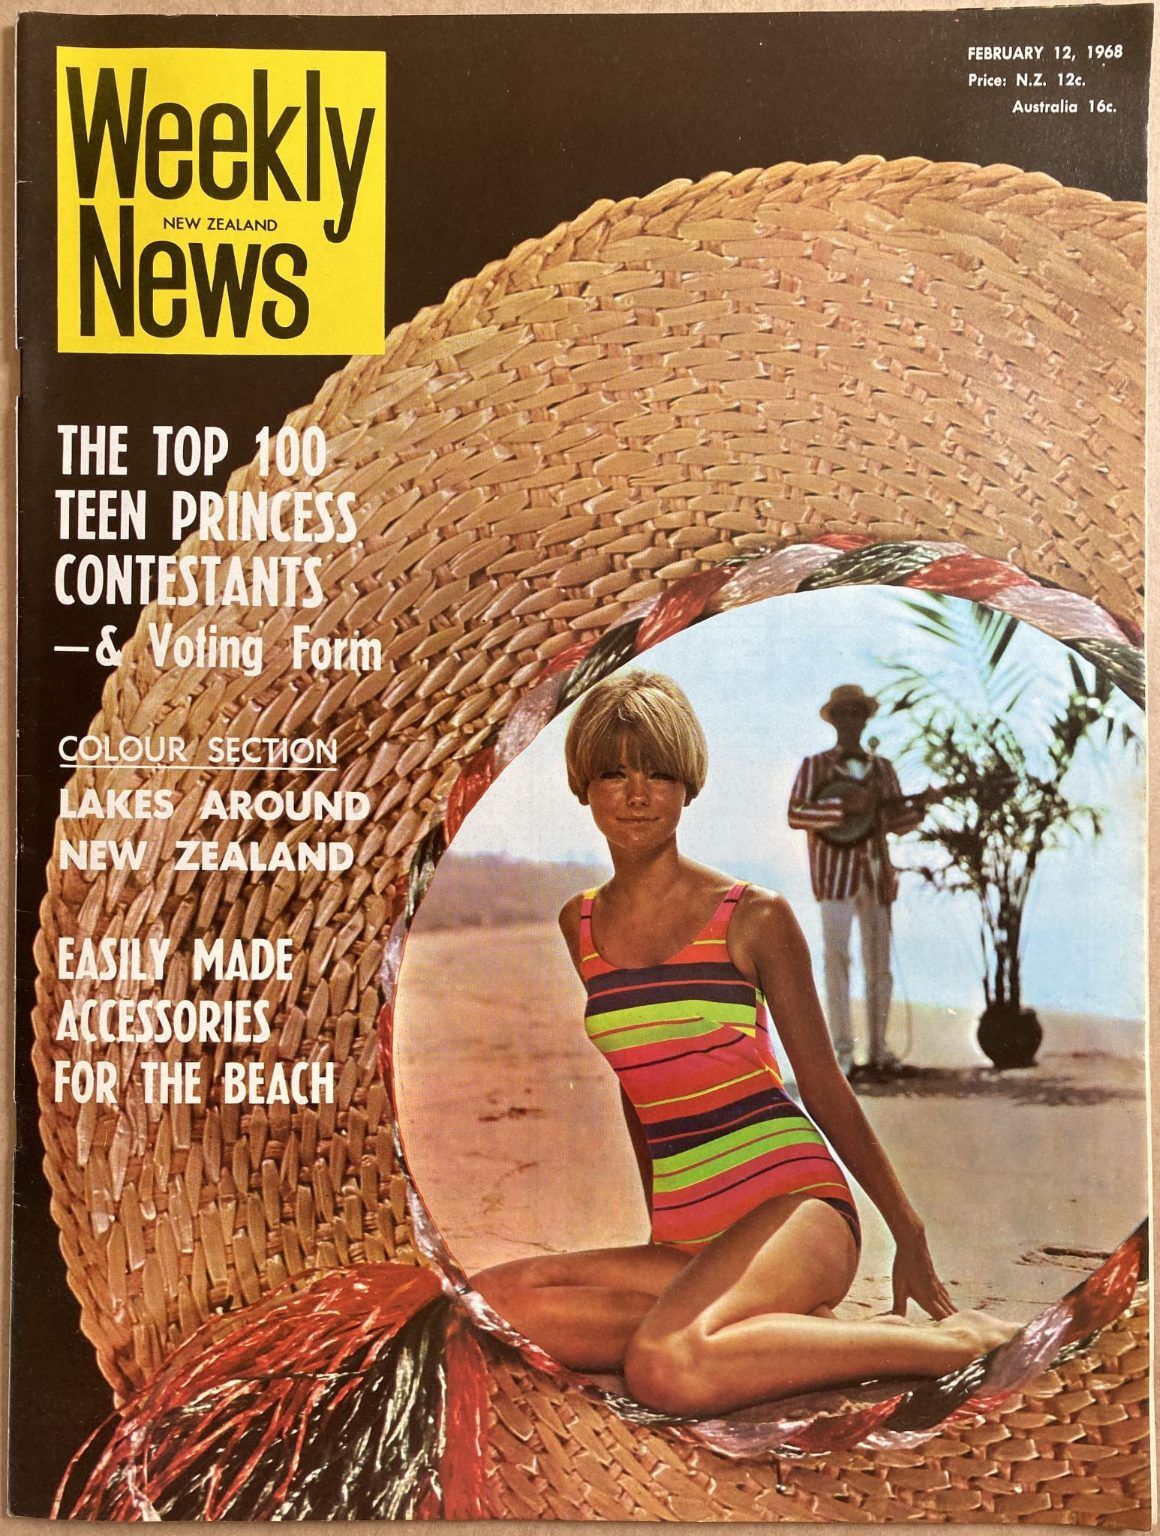 OLD NEWSPAPER: New Zealand Weekly News, No. 5437, 12 February 1968